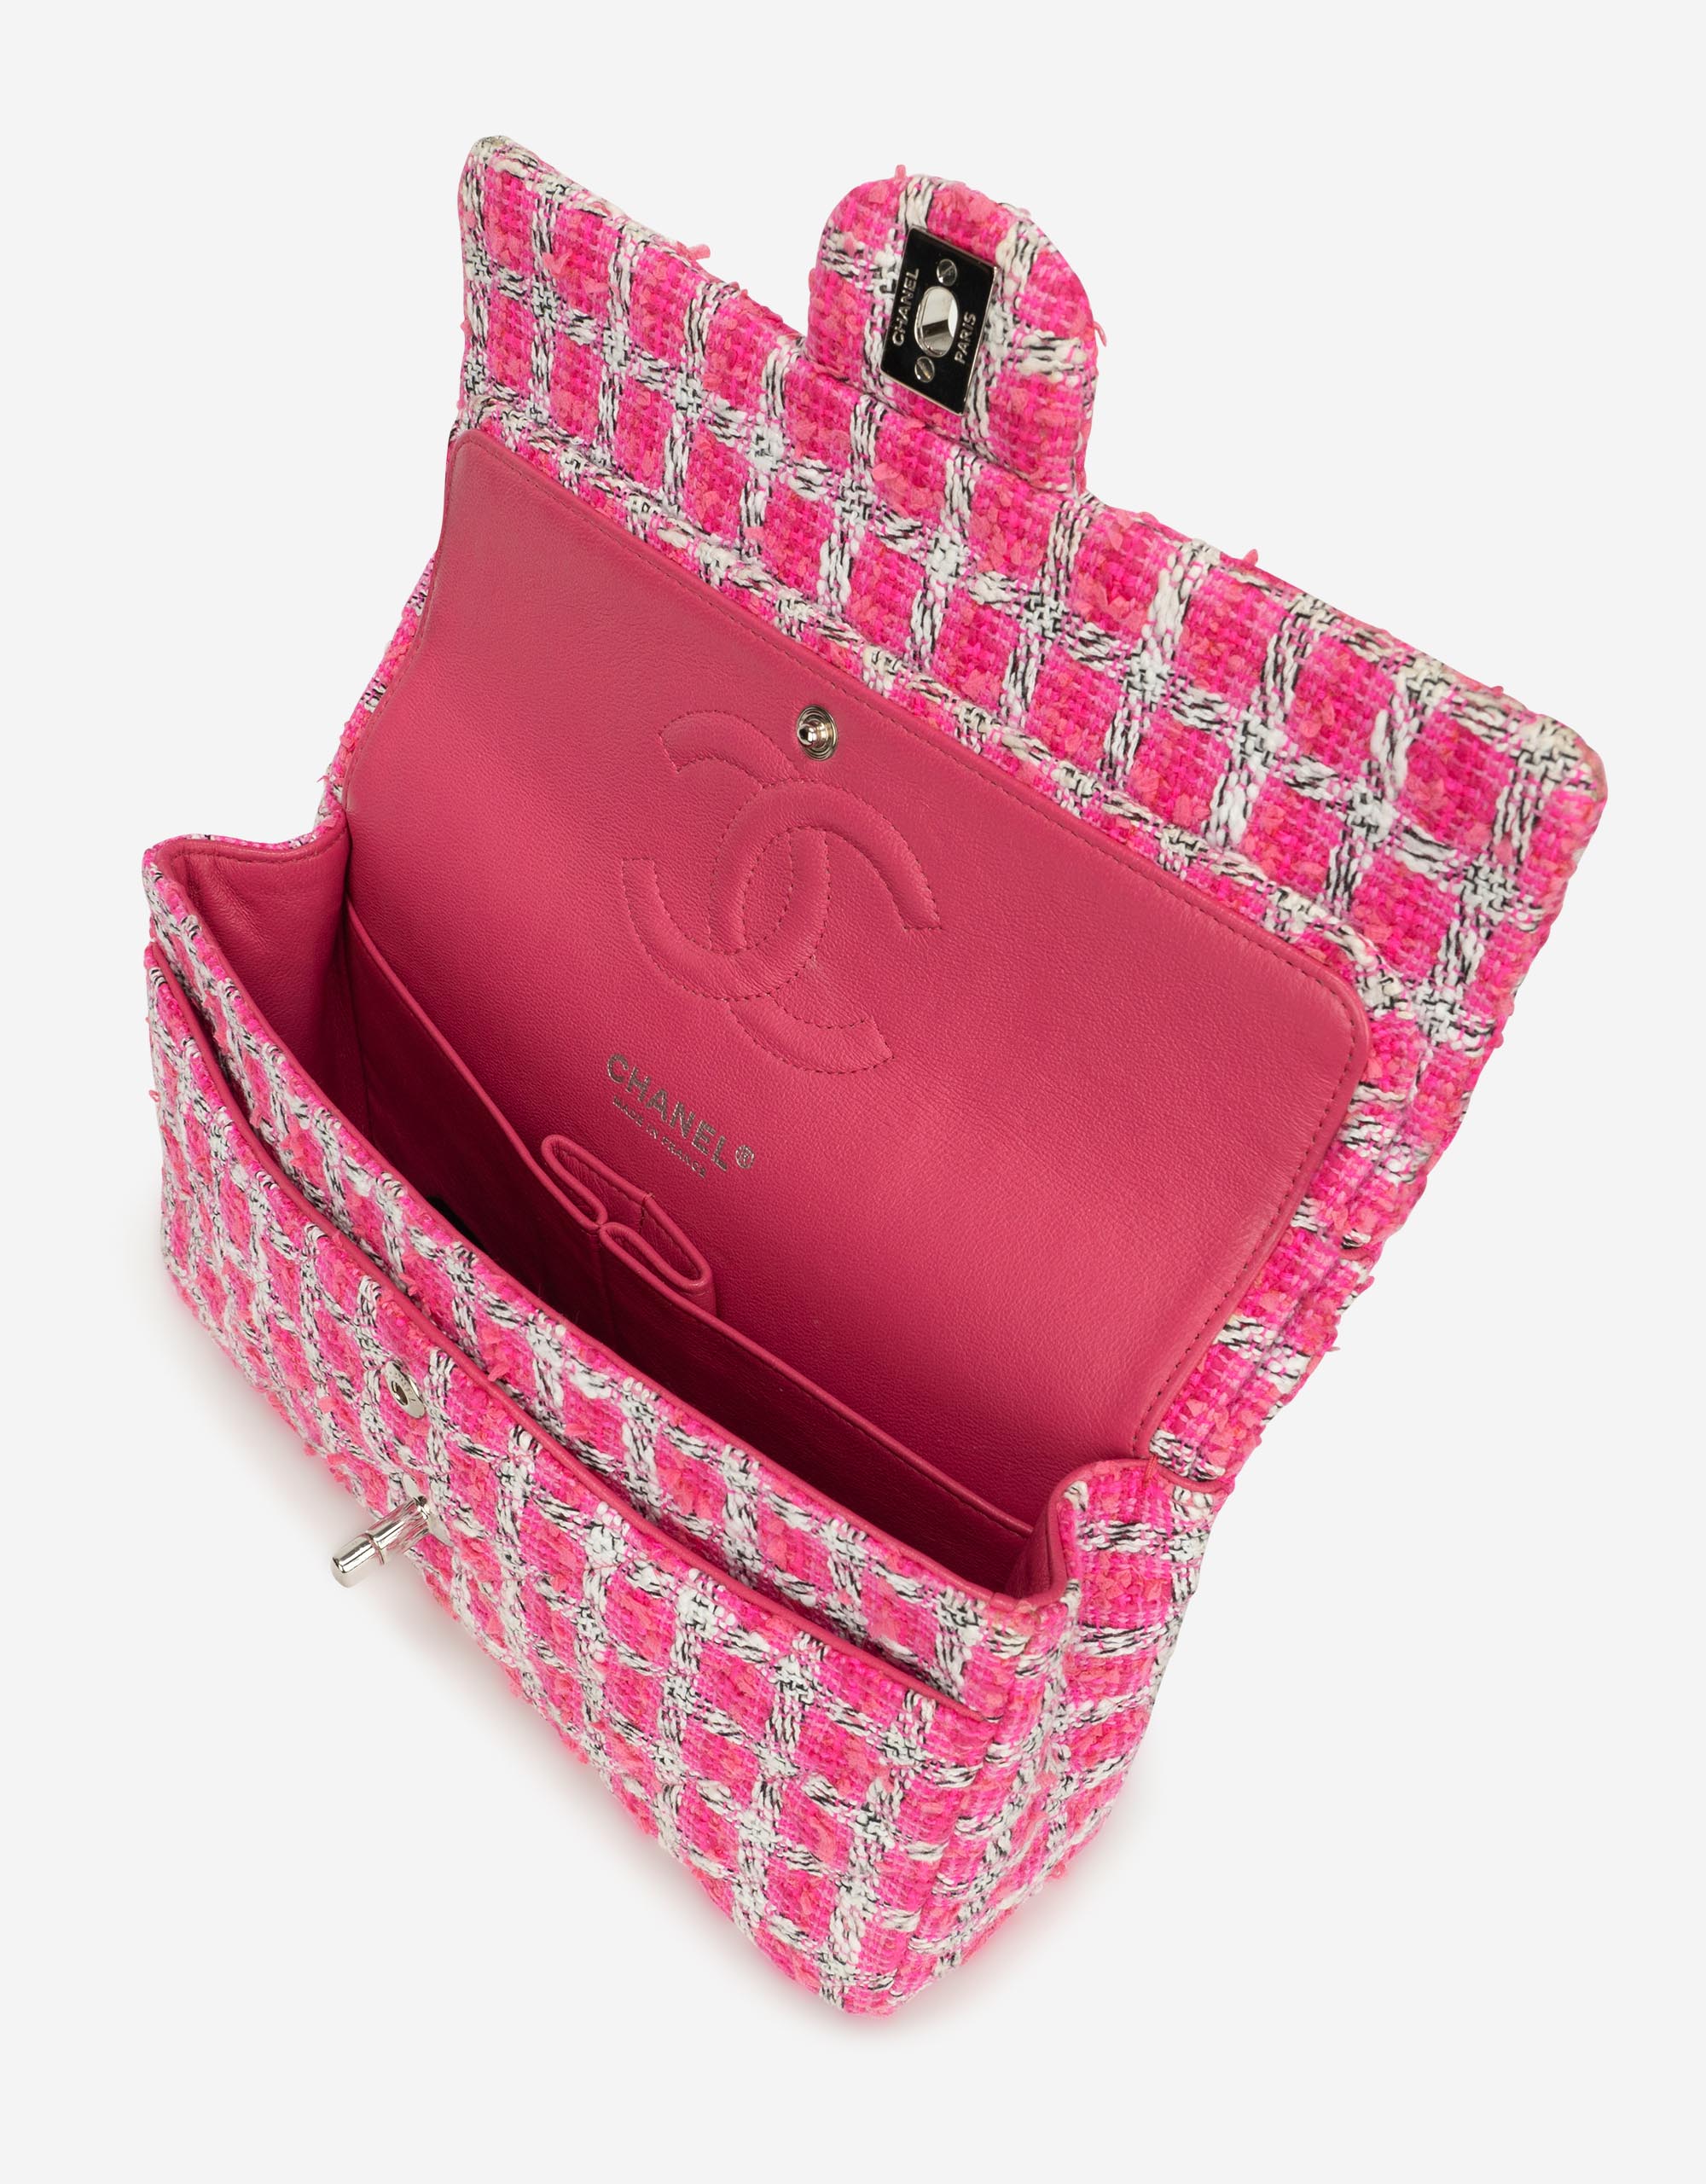 Pre-owned Chanel bag Timeless Medium Tweed Pink / White Pink, White | Sell your designer bag on Saclab.com